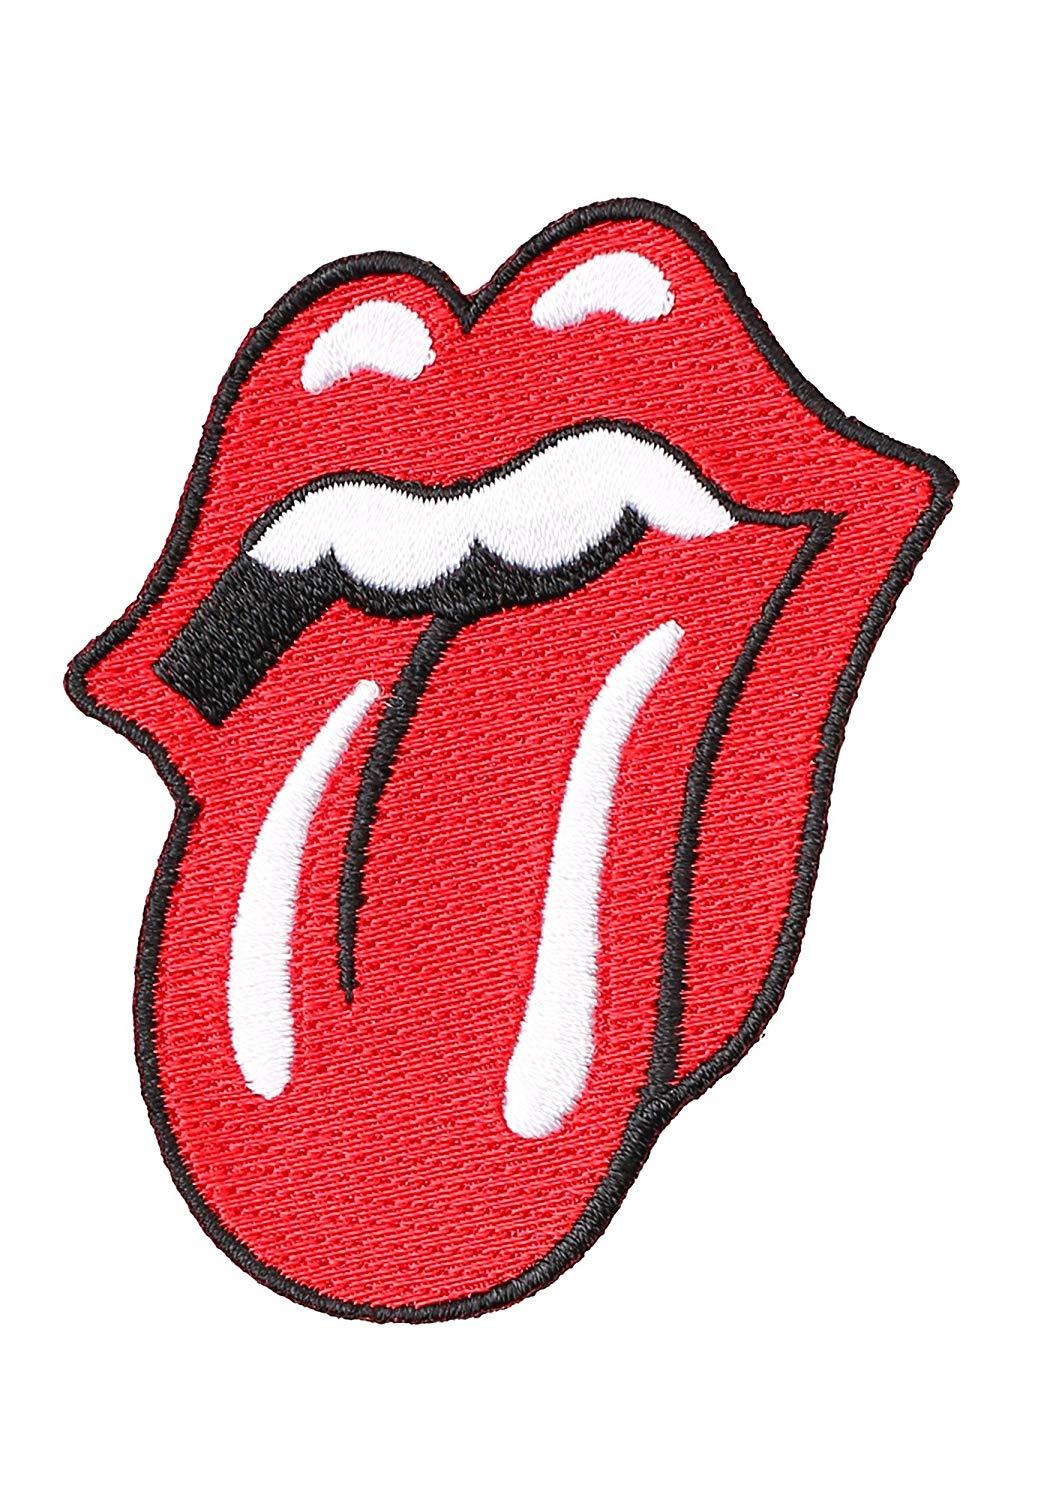 Red Lips and Tongue Logo - Amazon.com: Rolling Stones Tongue Logo Patch Standard: Clothing